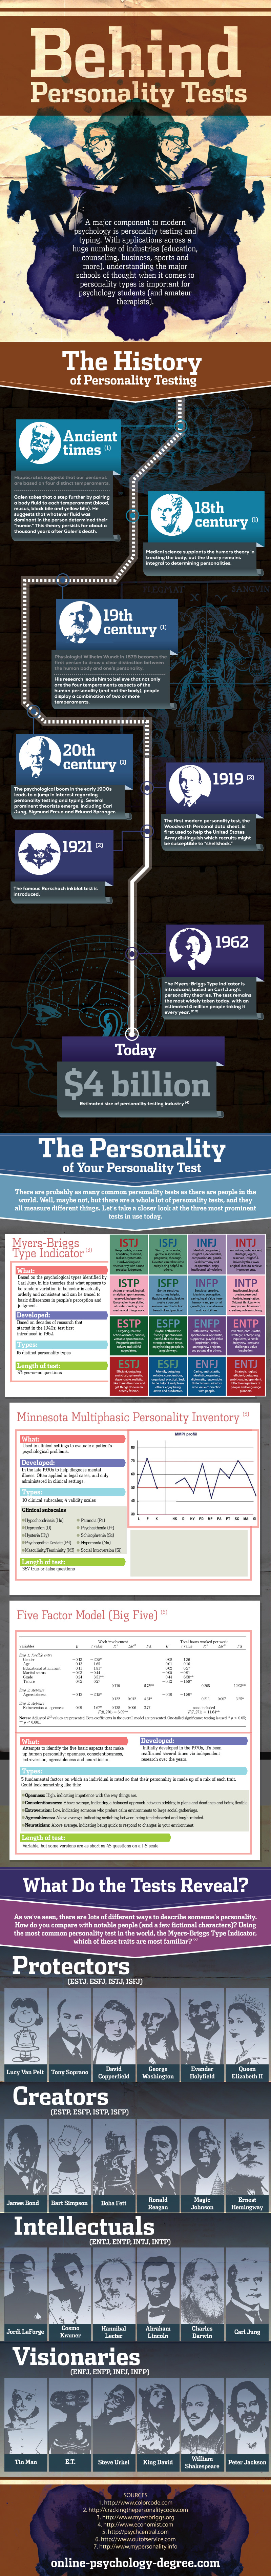 PersonalityTests